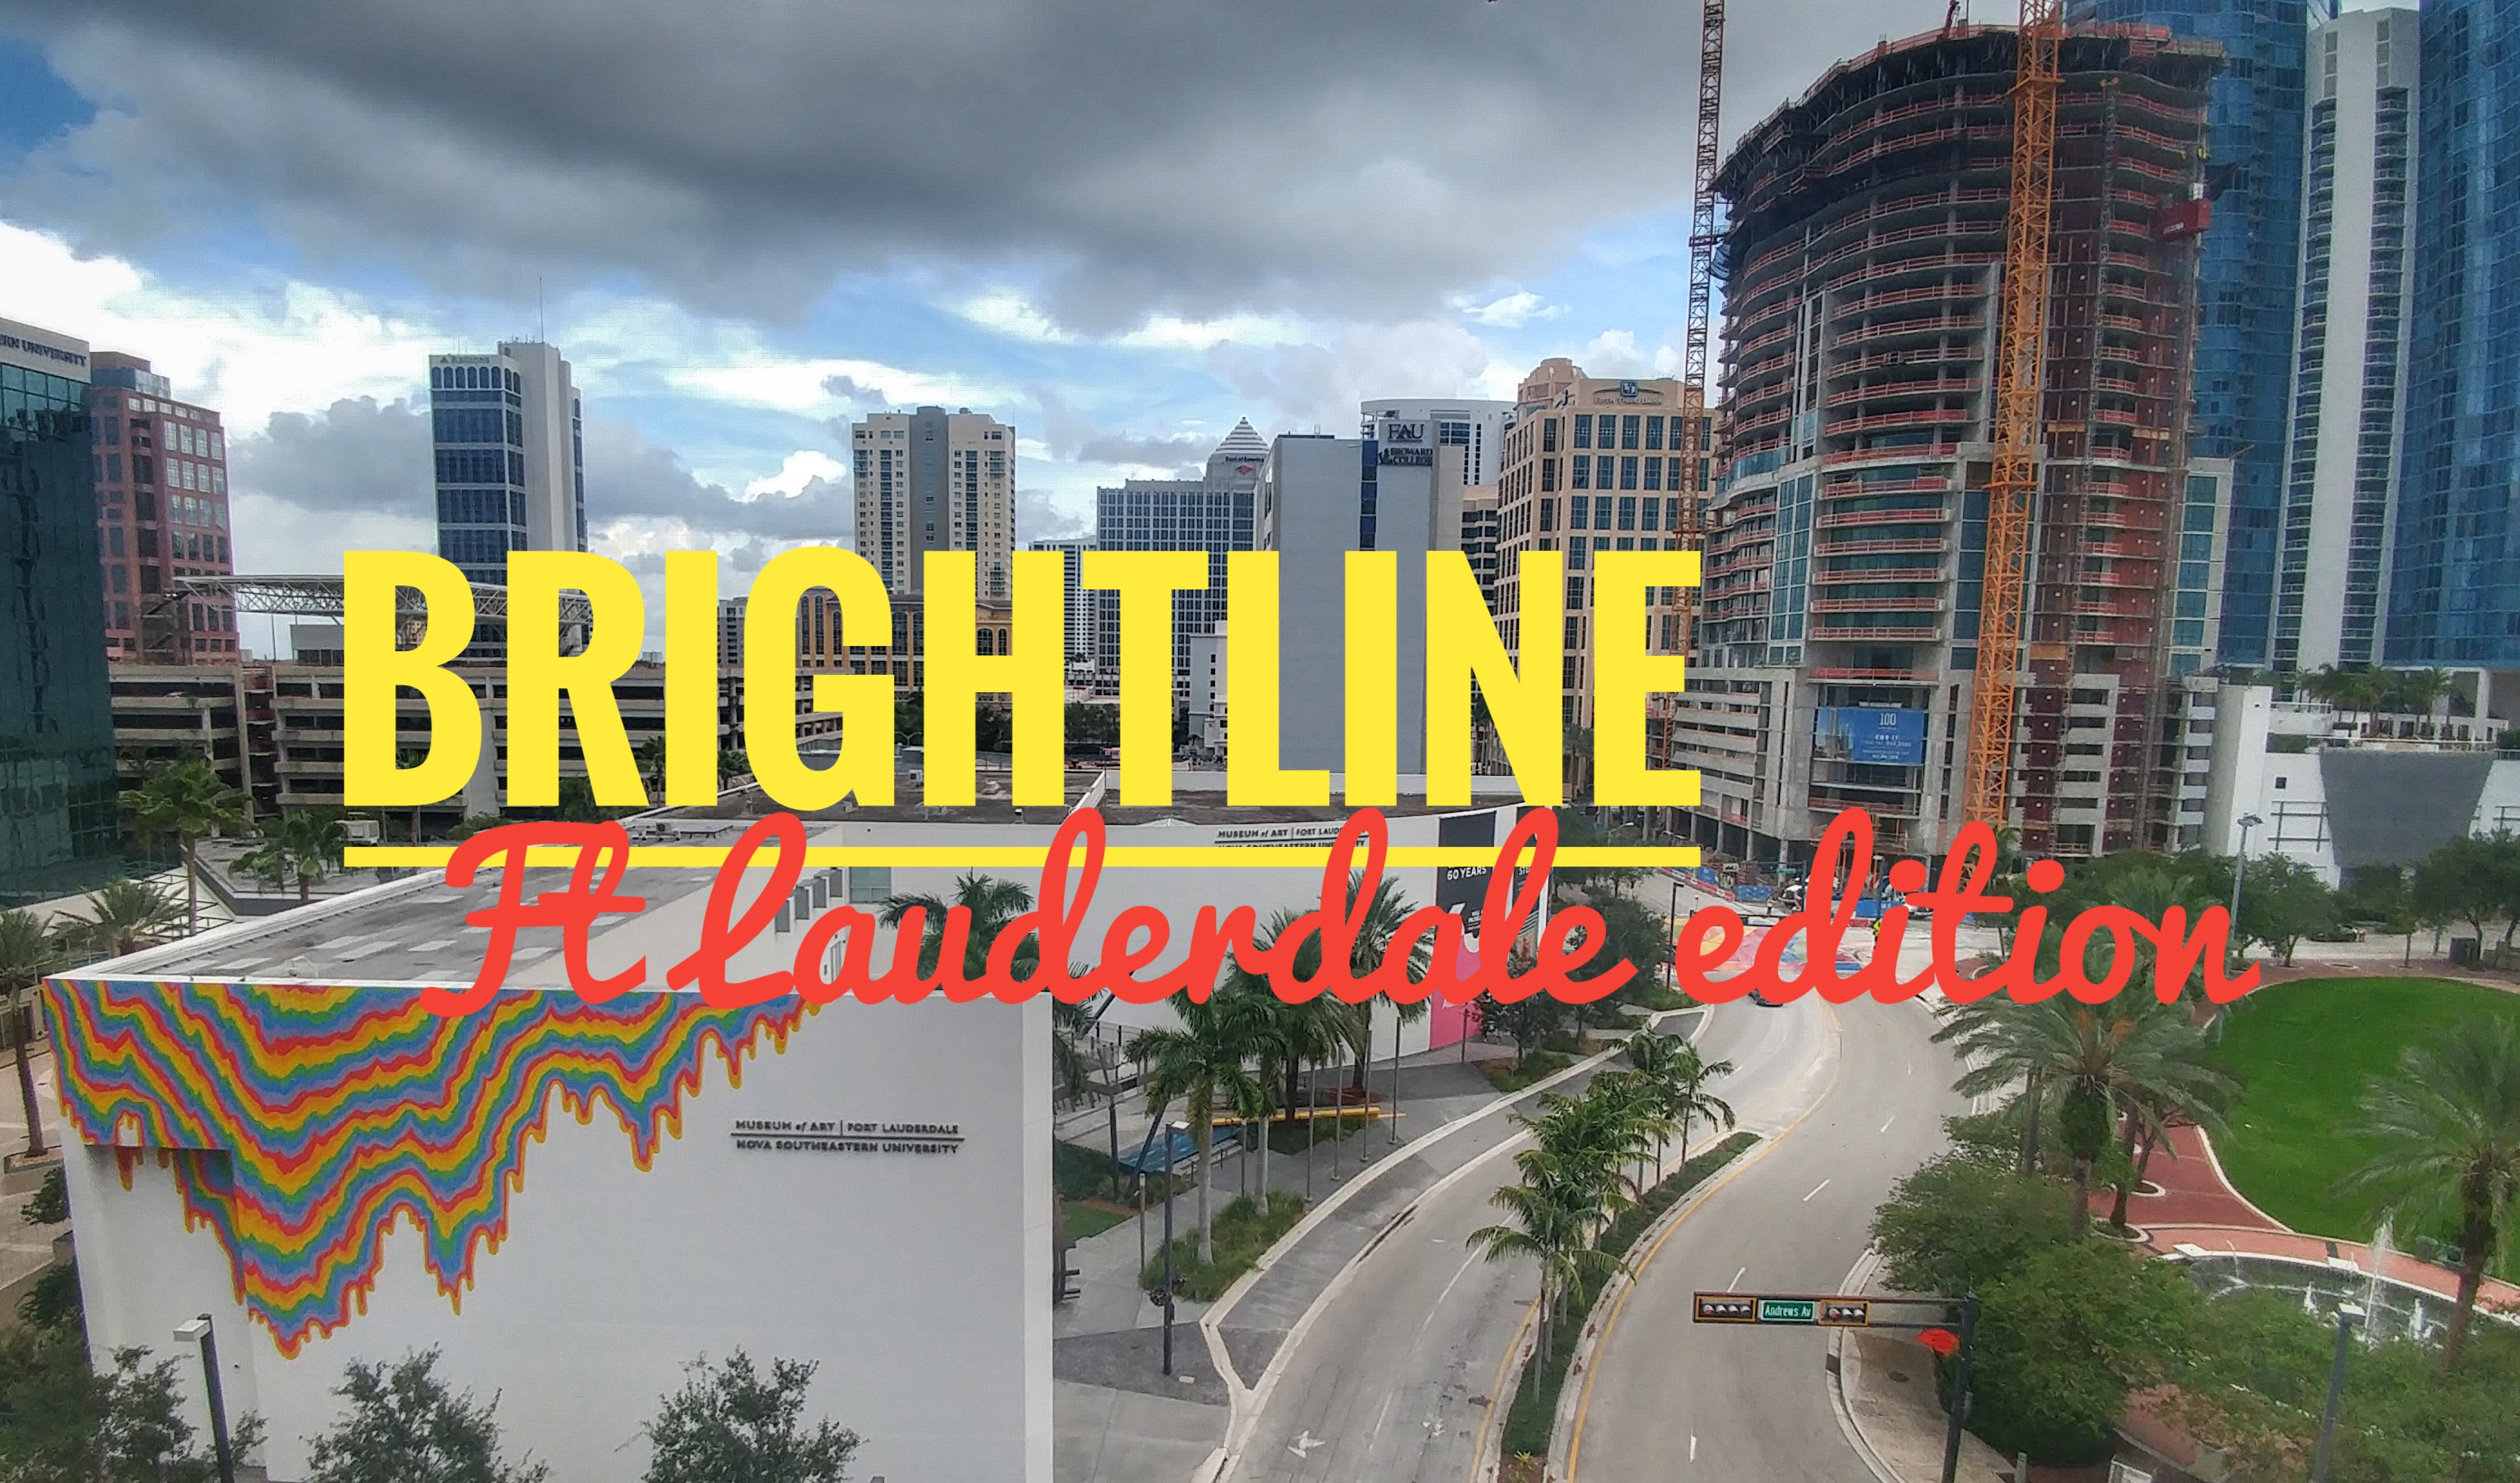 The Brightline has made Ft. Lauderdale our back yard